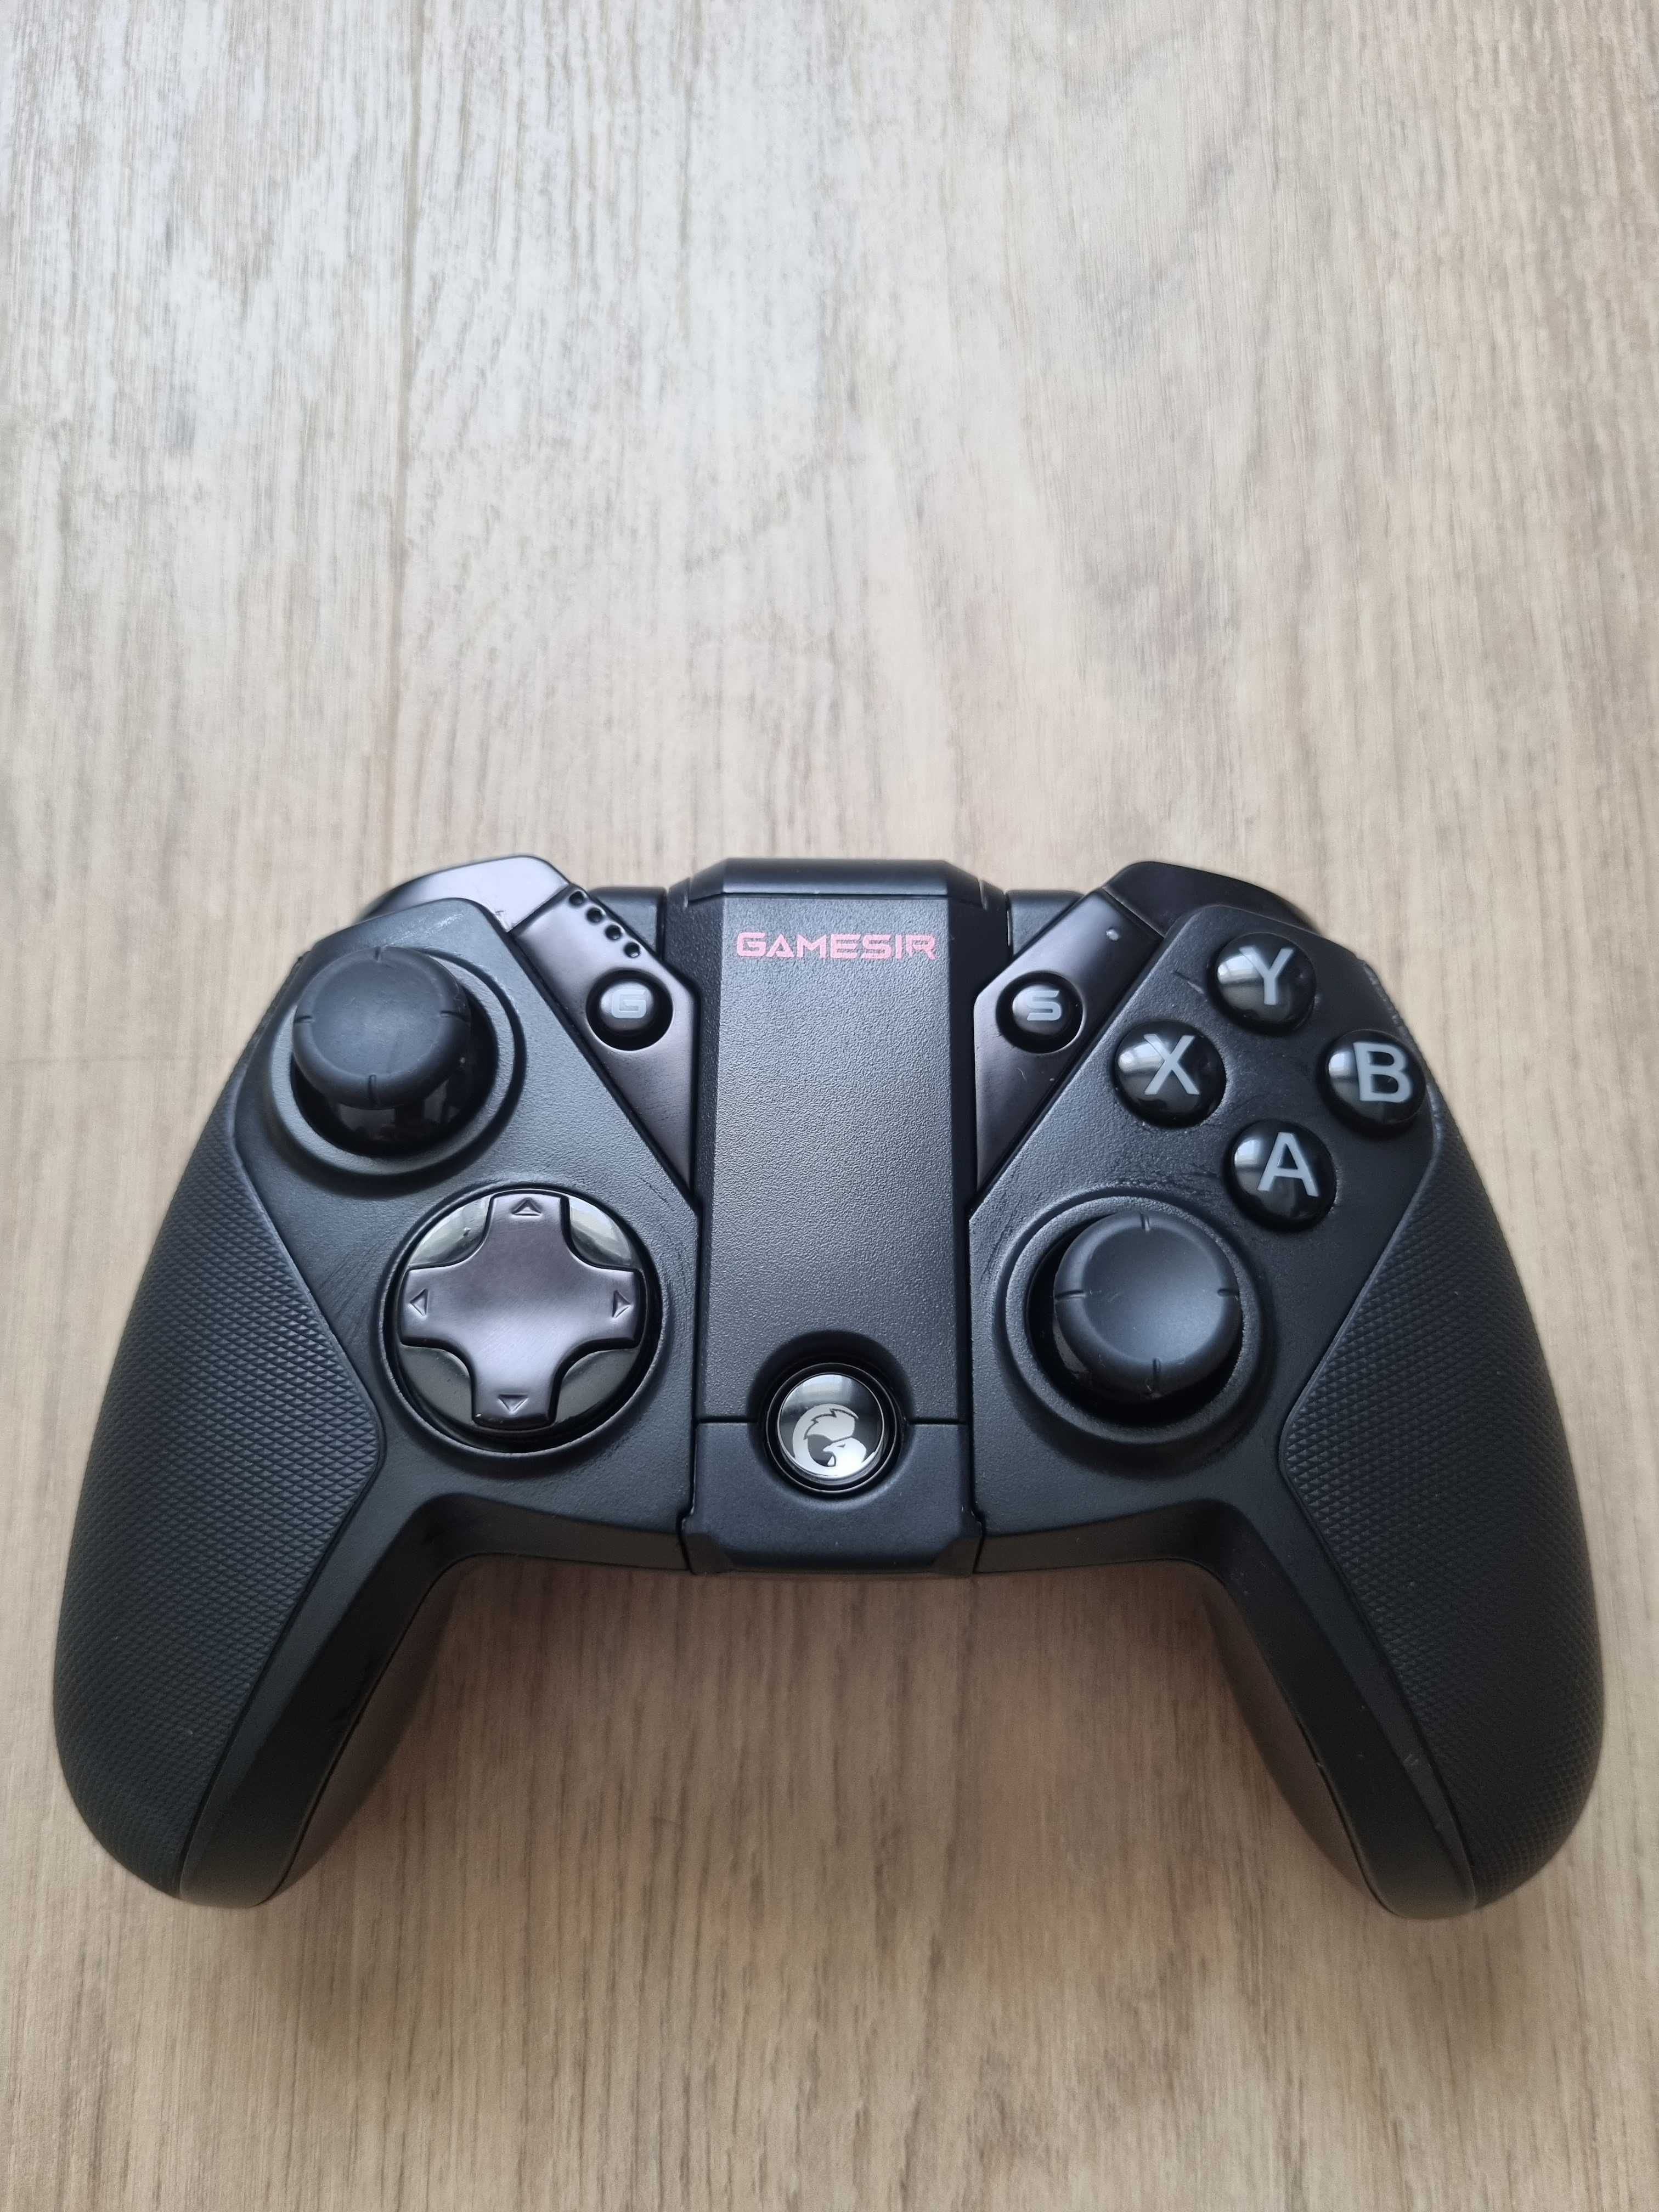 Controller Wireless/Wired Gamesir G4 Pro - PC, Android, iPhone, Switch